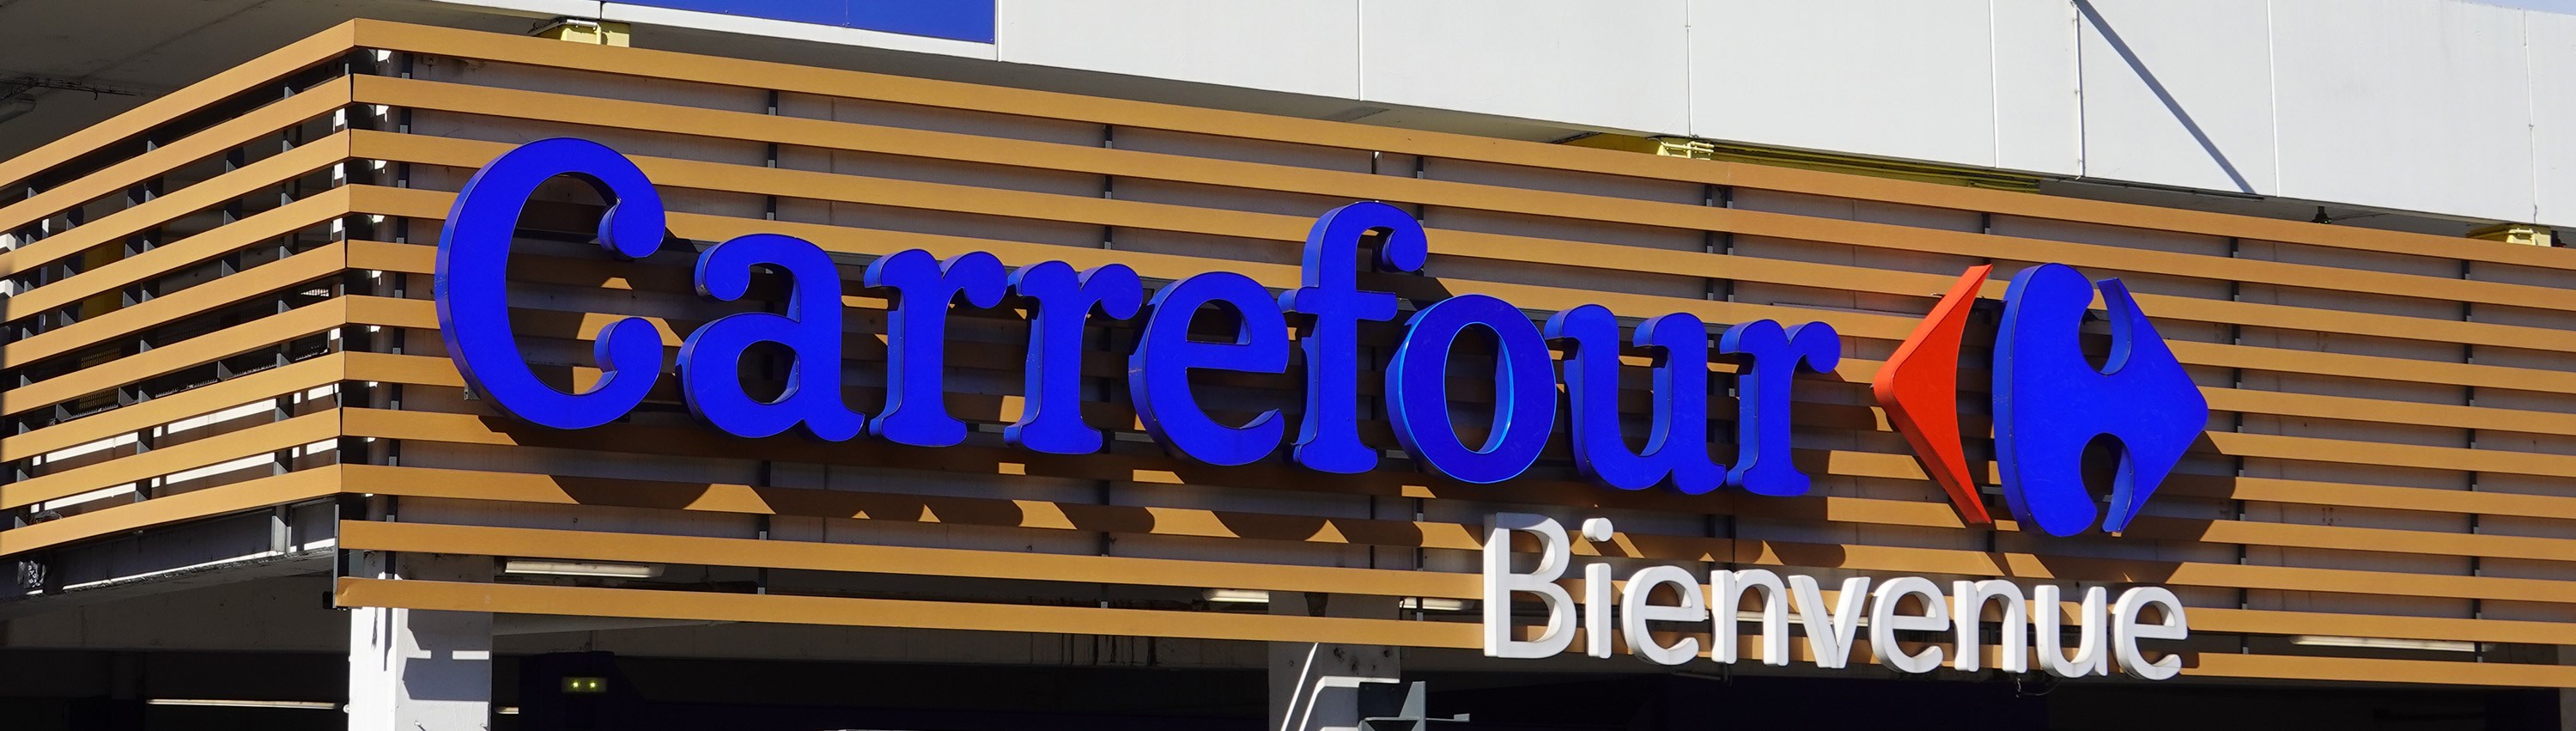 Carrefour store, Annecy, France. Photo: Guilhem Vellut/Flickr/CC BY 2.0 DEED